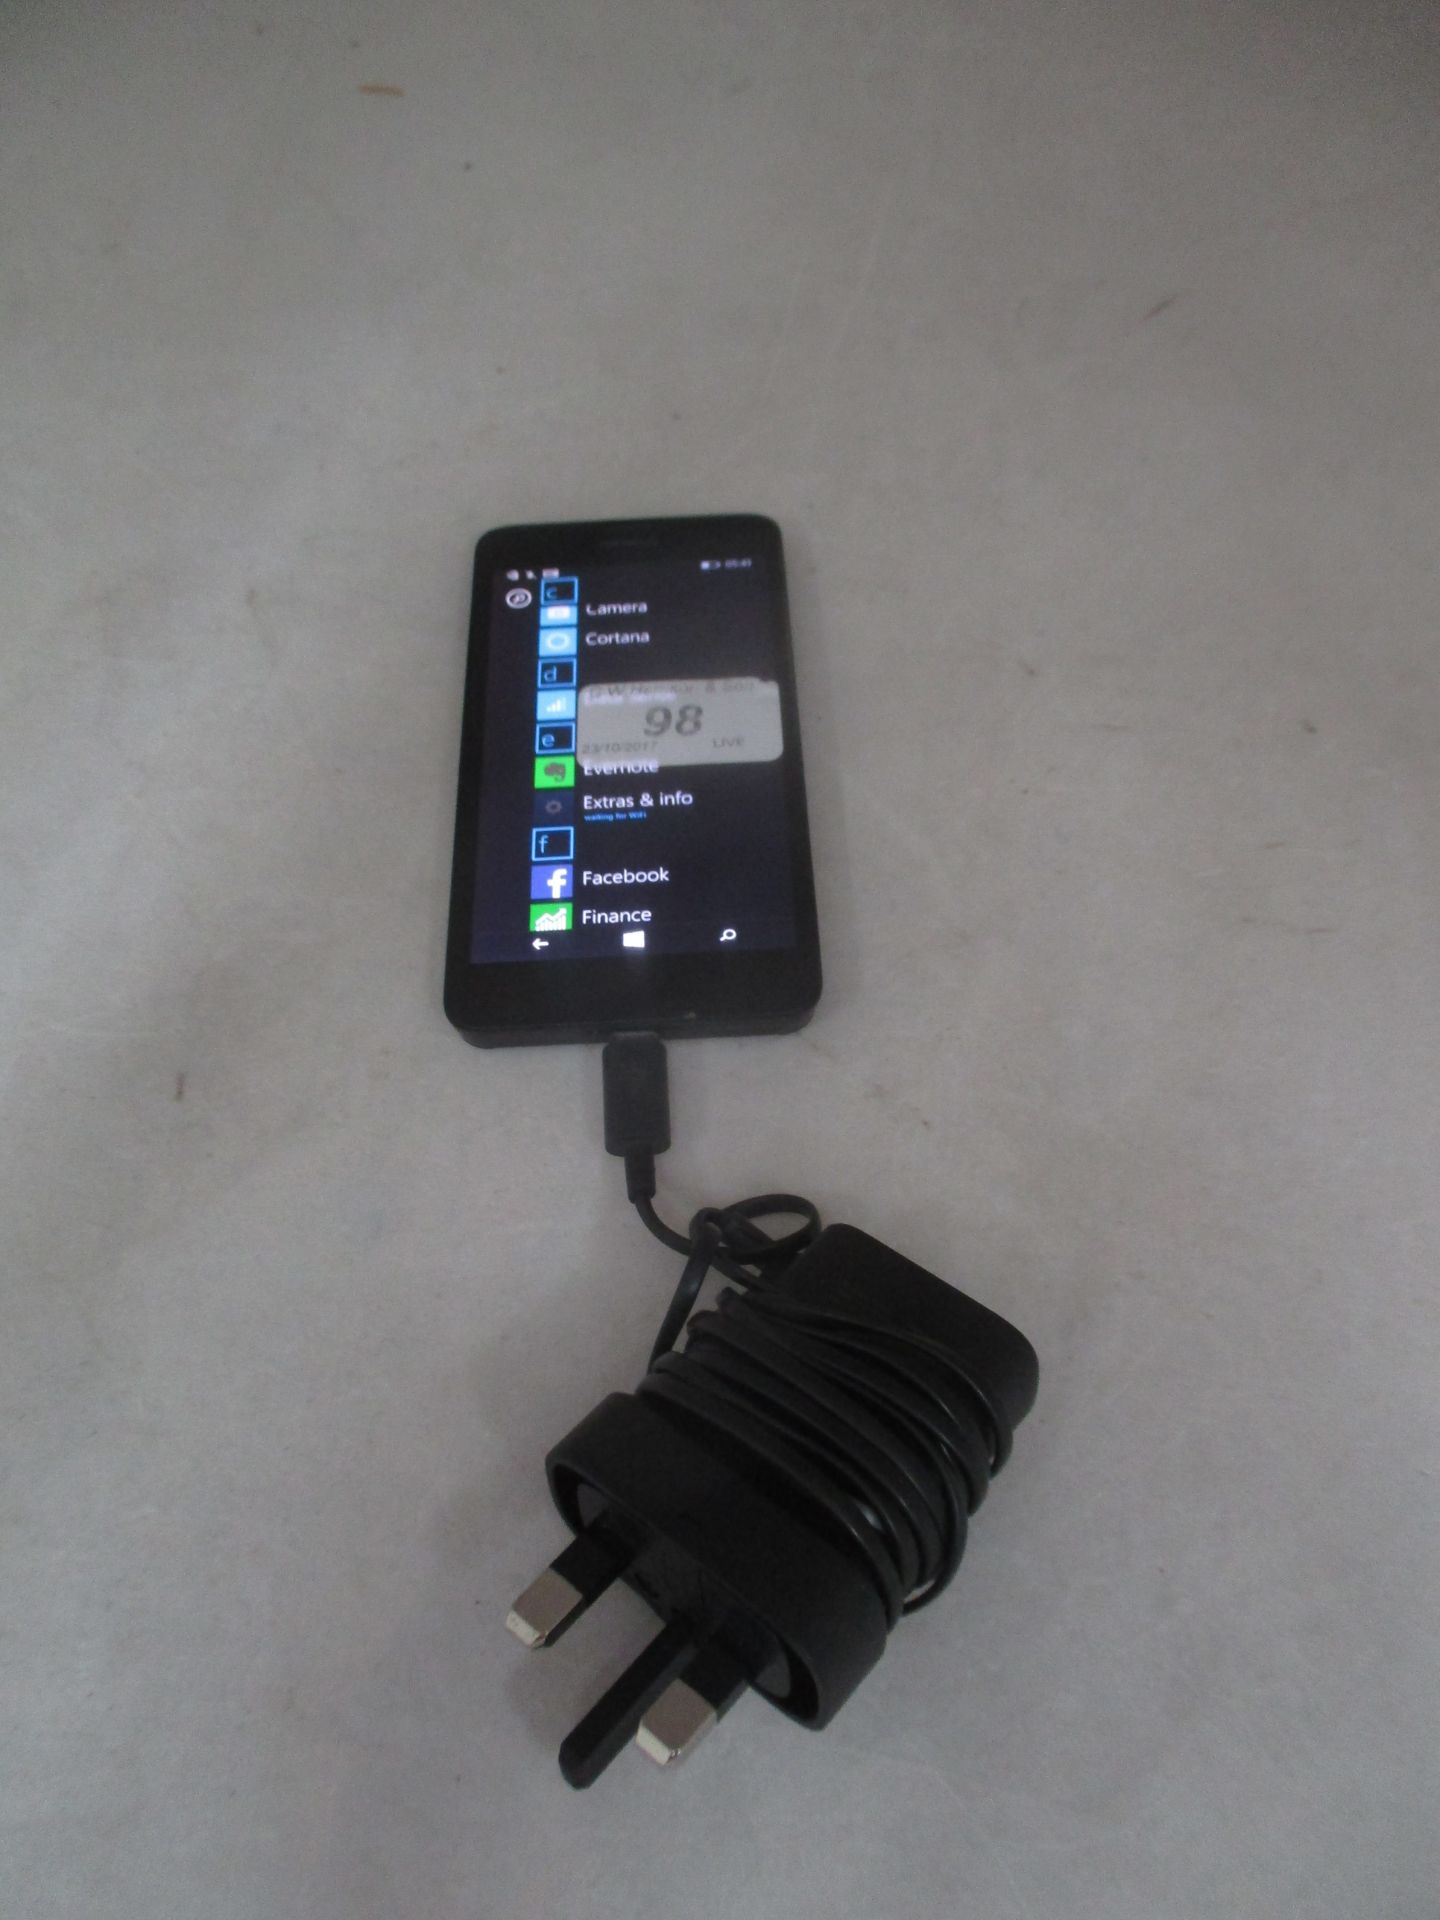 A Nokia Lumia RM-974 Microsoft mobile phone with charger